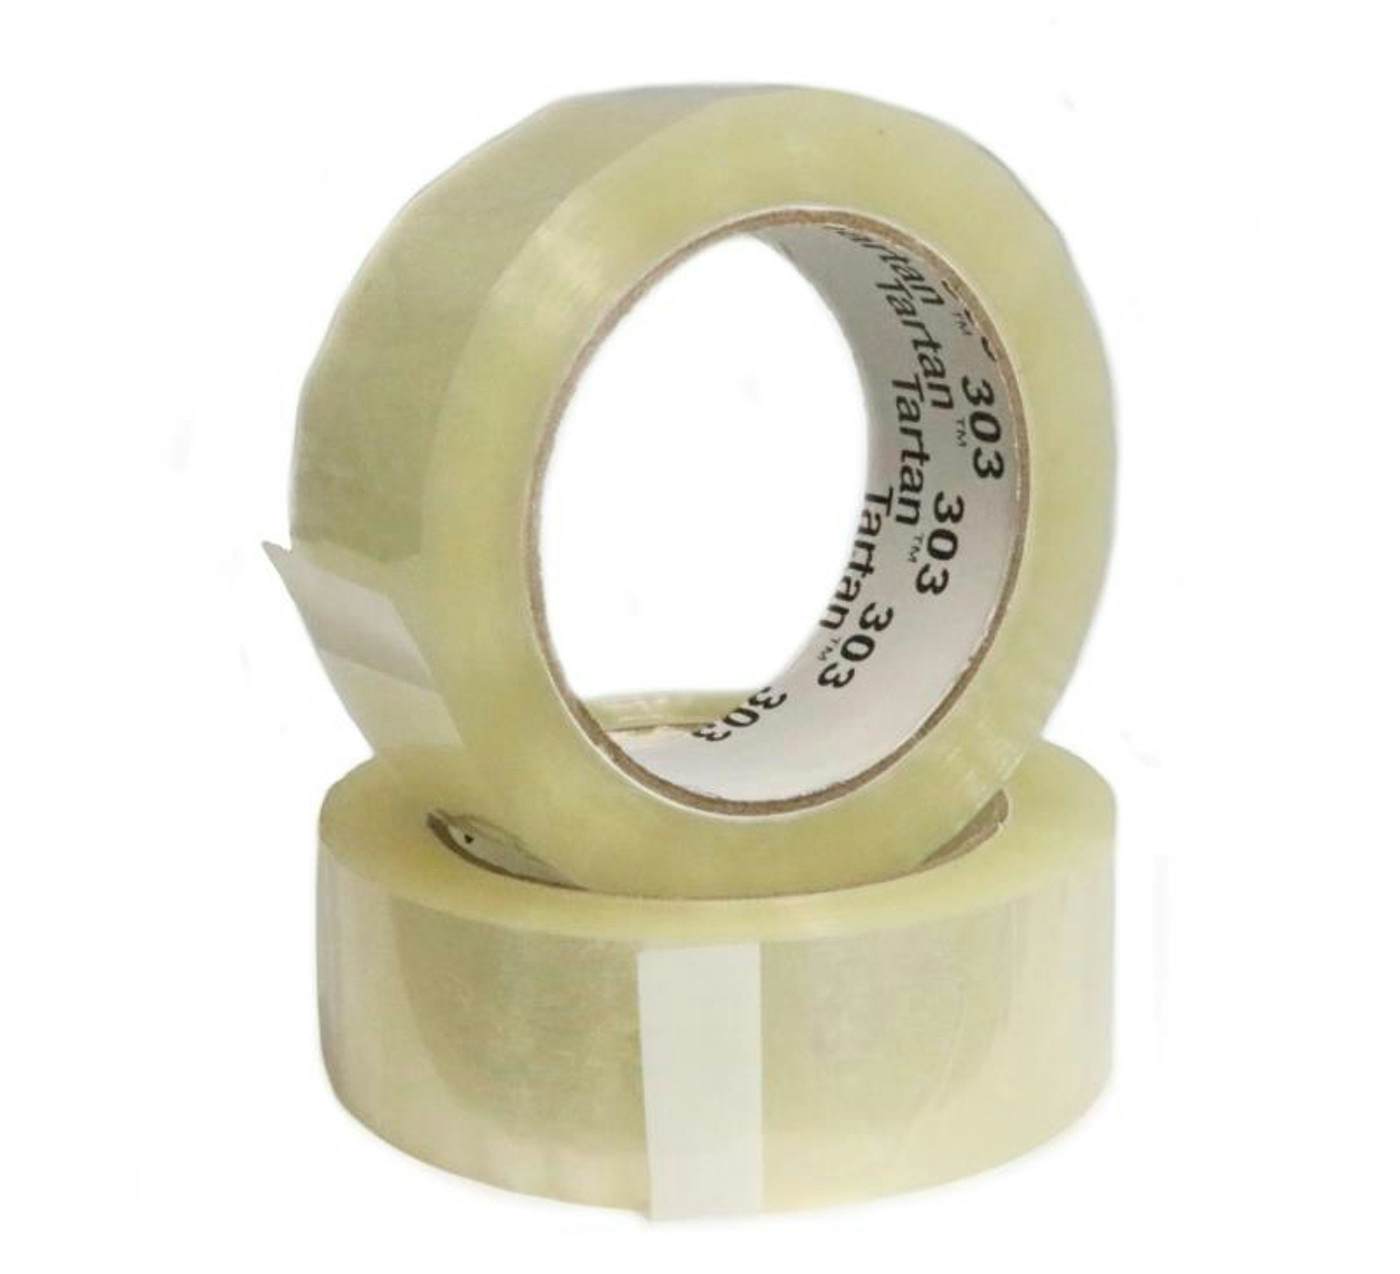 Clear Packaging Tape 36mm X 100mt  71765.1592720346 ?c=1&w=1400&h=1400&fit=fill&fill Color=fff&q=40&auto=format